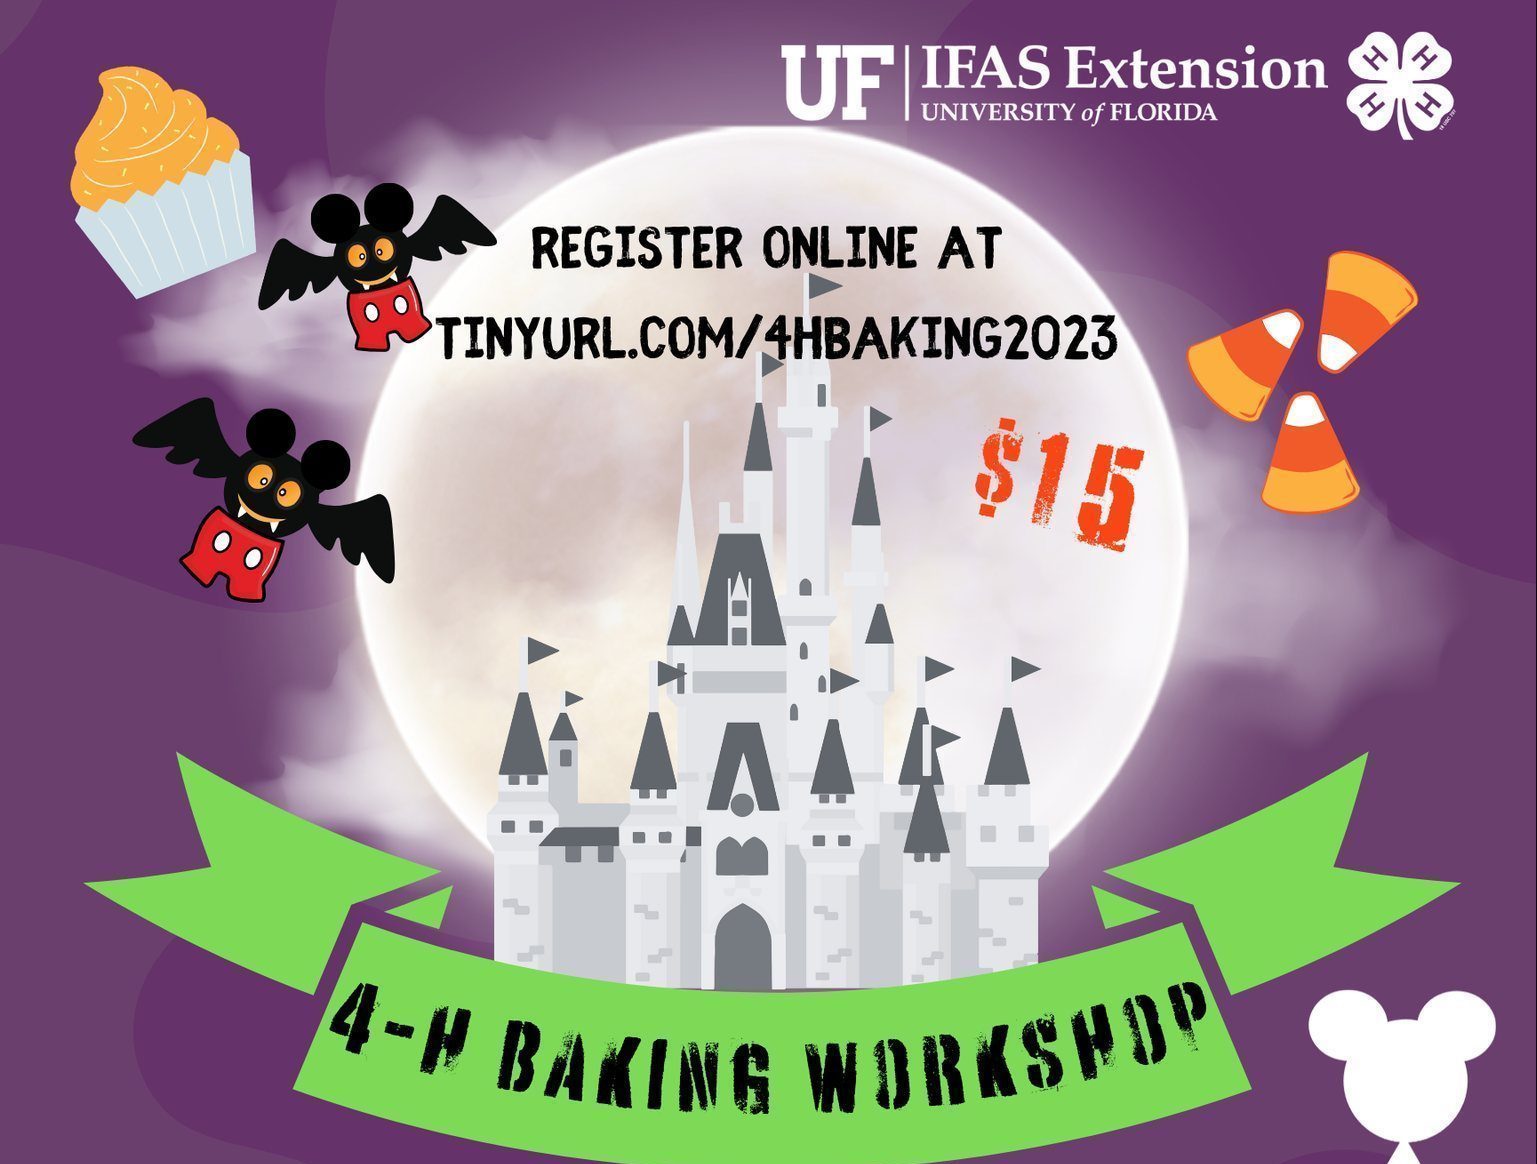 4-H Baking Workshop Monday, October 16th 1:00-4:00pm UF/IFAS Extension Clay County Godbold Bldg Baking is NOT-SO-SCARY Learn some new baking skills while preparing Disney inspired Halloween treats! (All 4-H ages welcome). Please Join Us!